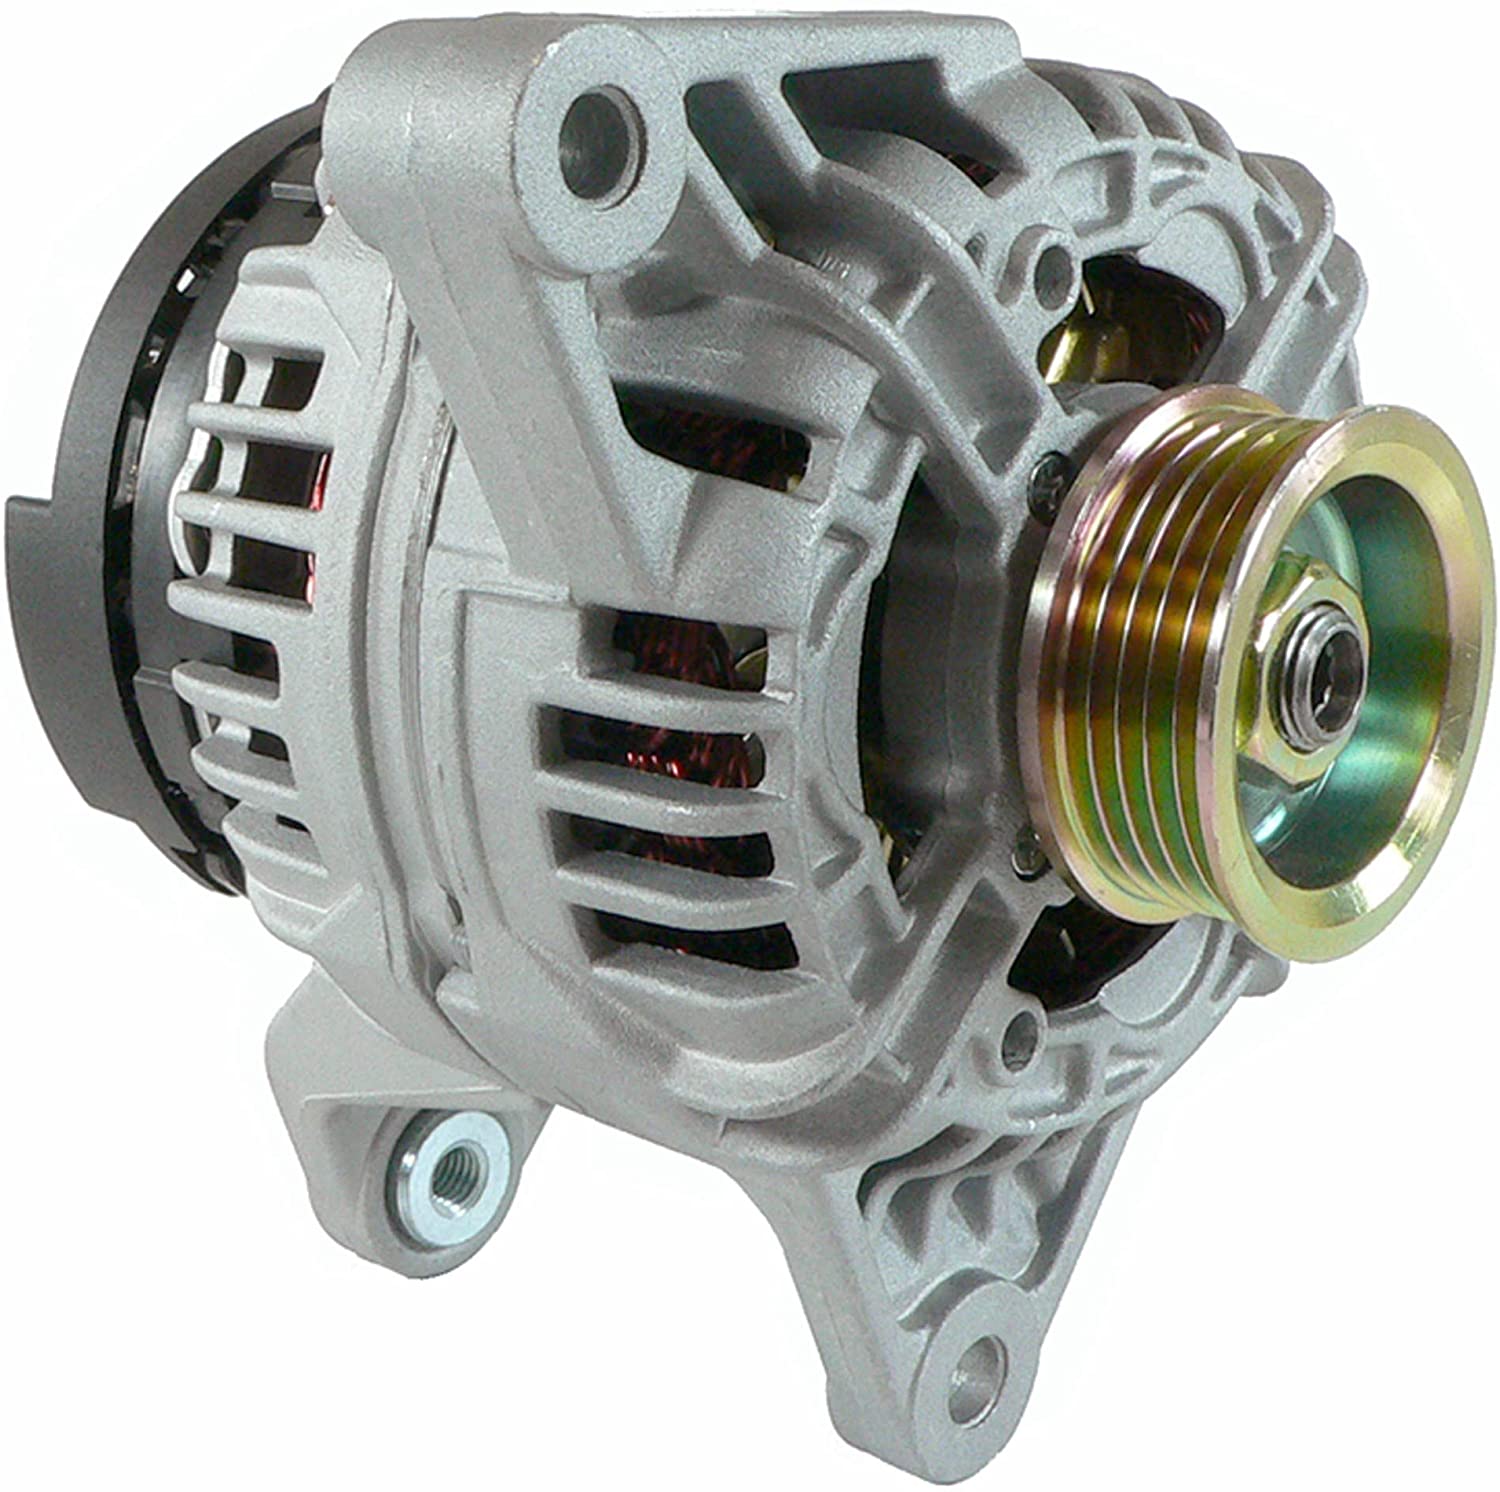 DB Electrical ABO0230 Alternator Compatible With/Replacement For 1.8L Volkswagen Passat 2002-05, 1.8L Audi A4 Quattro 2000-01, 038-903-018E 038-903-018EX 06B-903-016A 0-124-325-017 0-124-325-036 13921